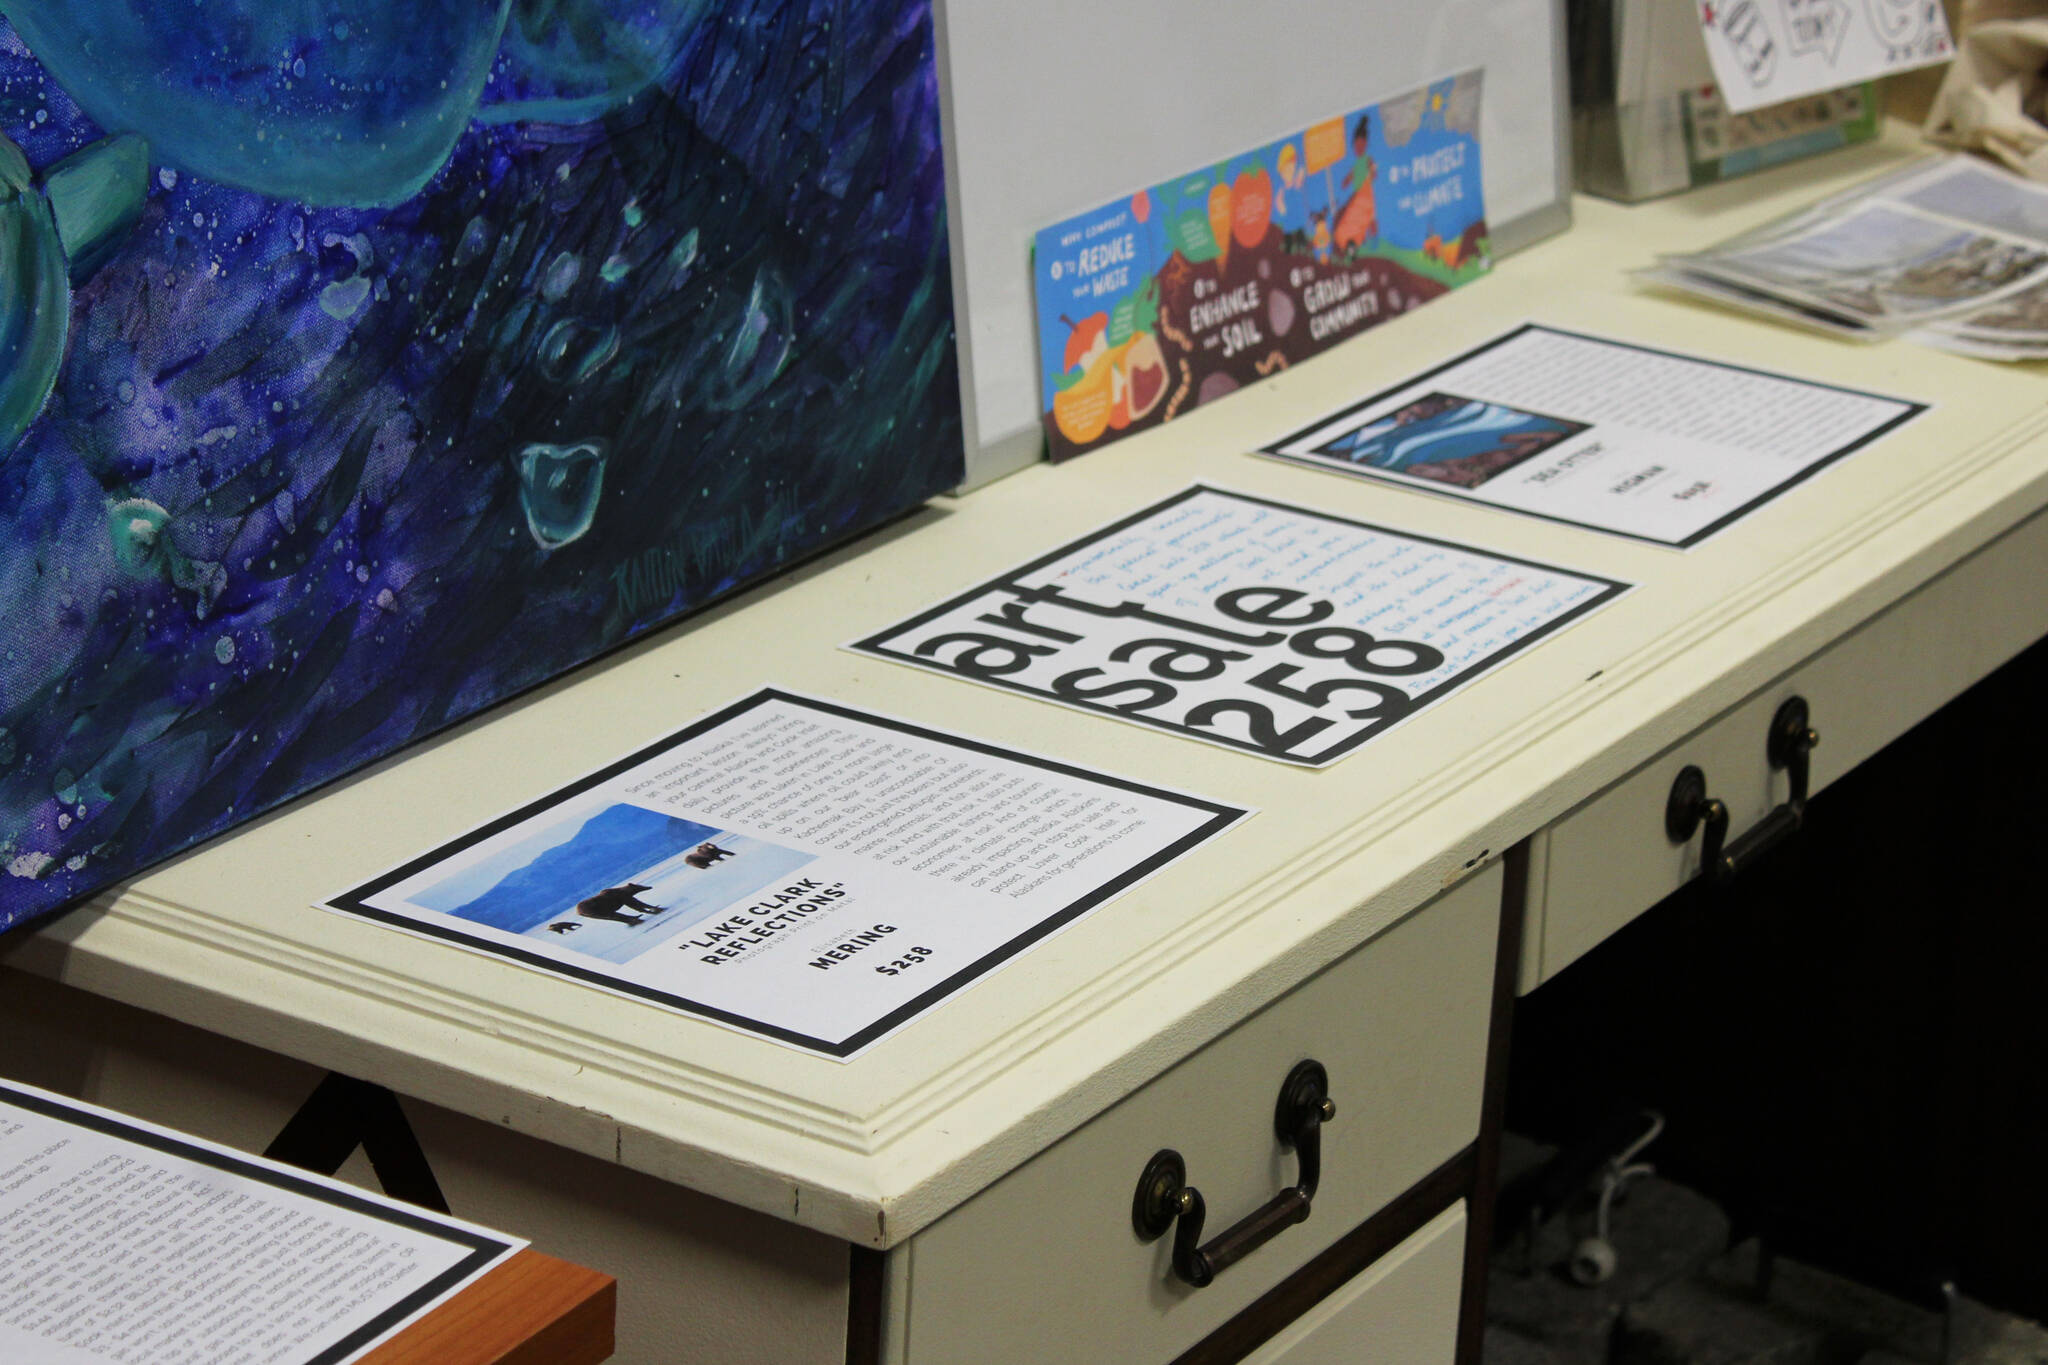 Placards display information and prices for art pieces up for auction as part of “ART Sale 258” at the Cook Inletkeeper Community Action Studio on Thursday, Dec. 9, 2021 in Soldotna, Alaska. (Ashlyn O’Hara/Peninsula Clarion)